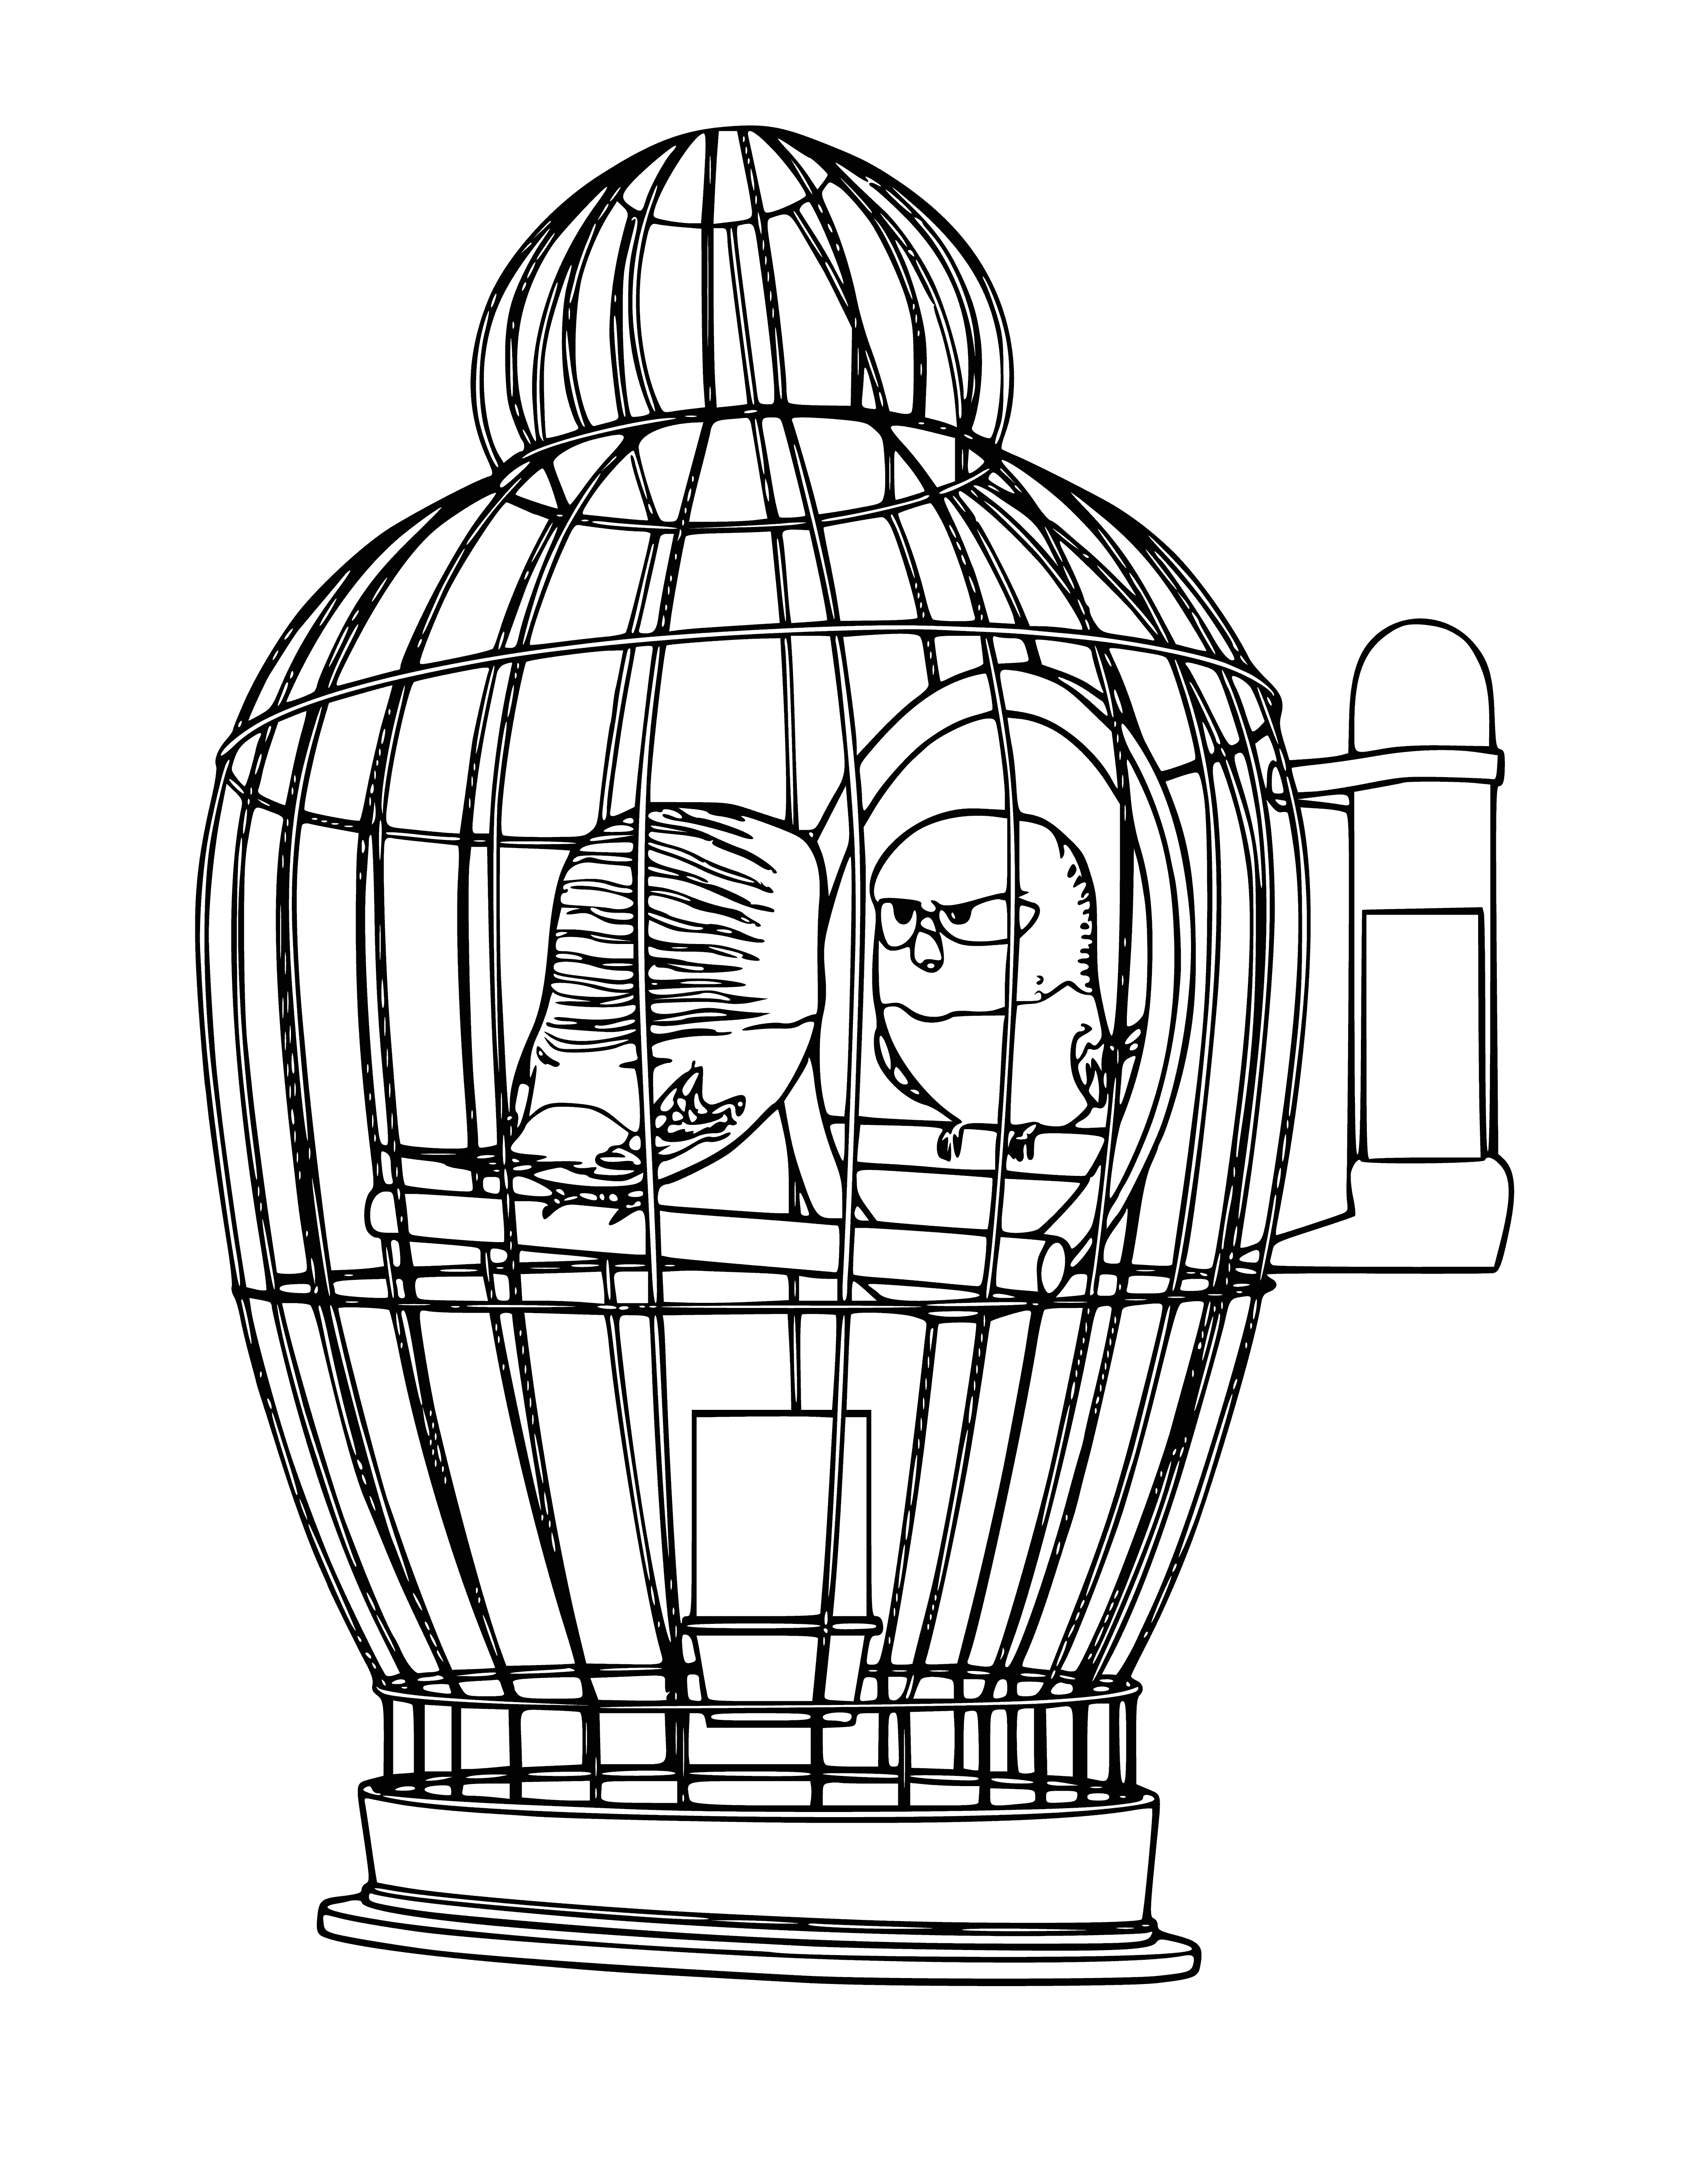 coloring page: Parrot in blue cage has green body, red beak and yellow bird on top, contentedly perched inside.